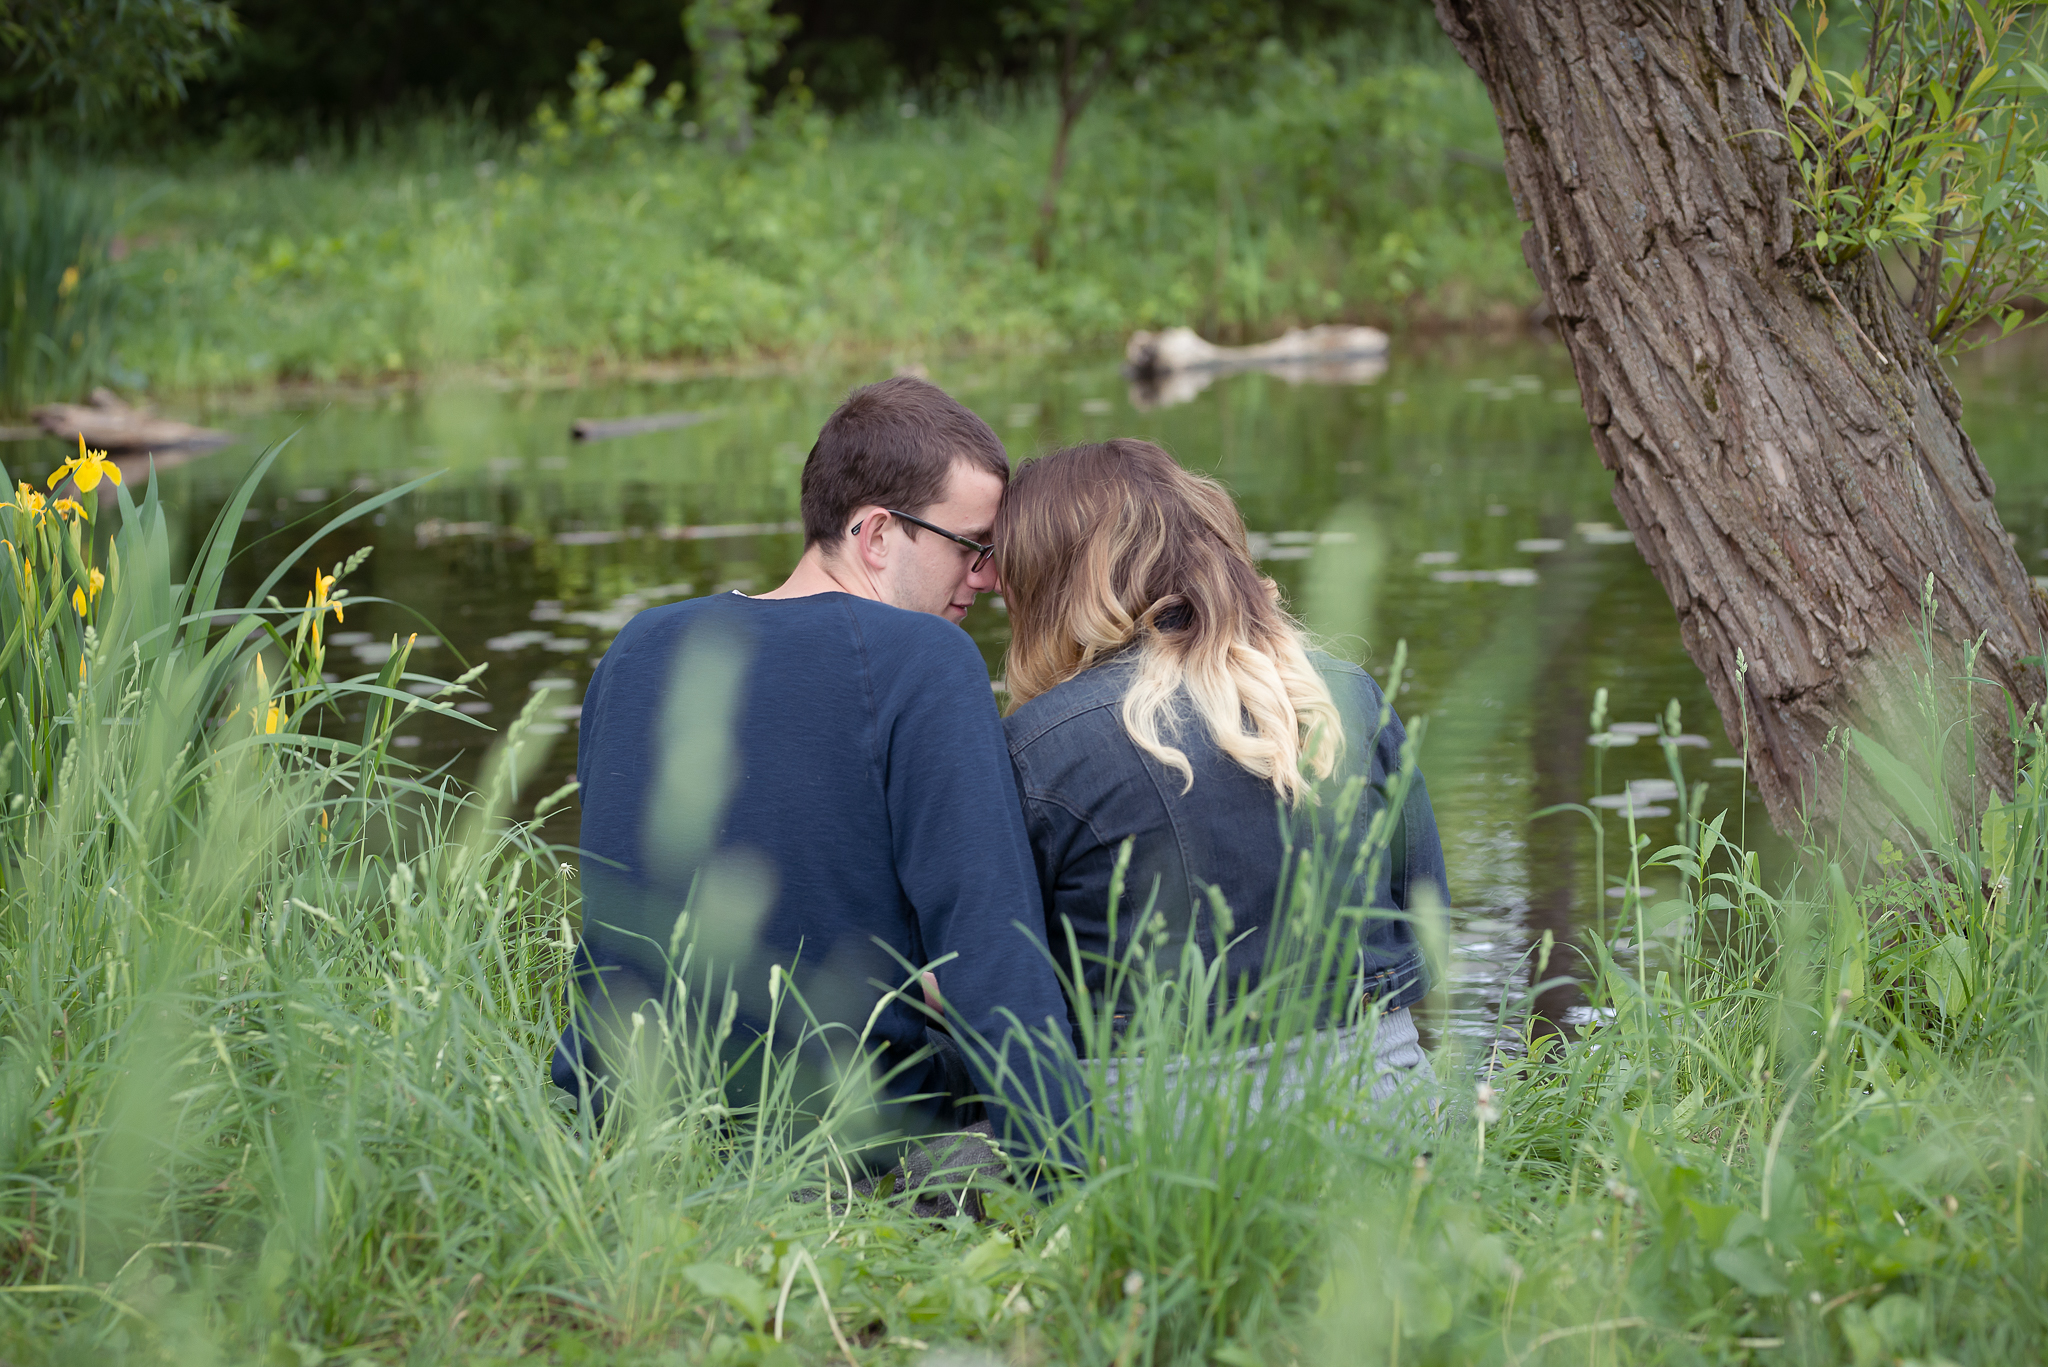 Couples434NaomiLuciennePhotography062018-Edit.jpg